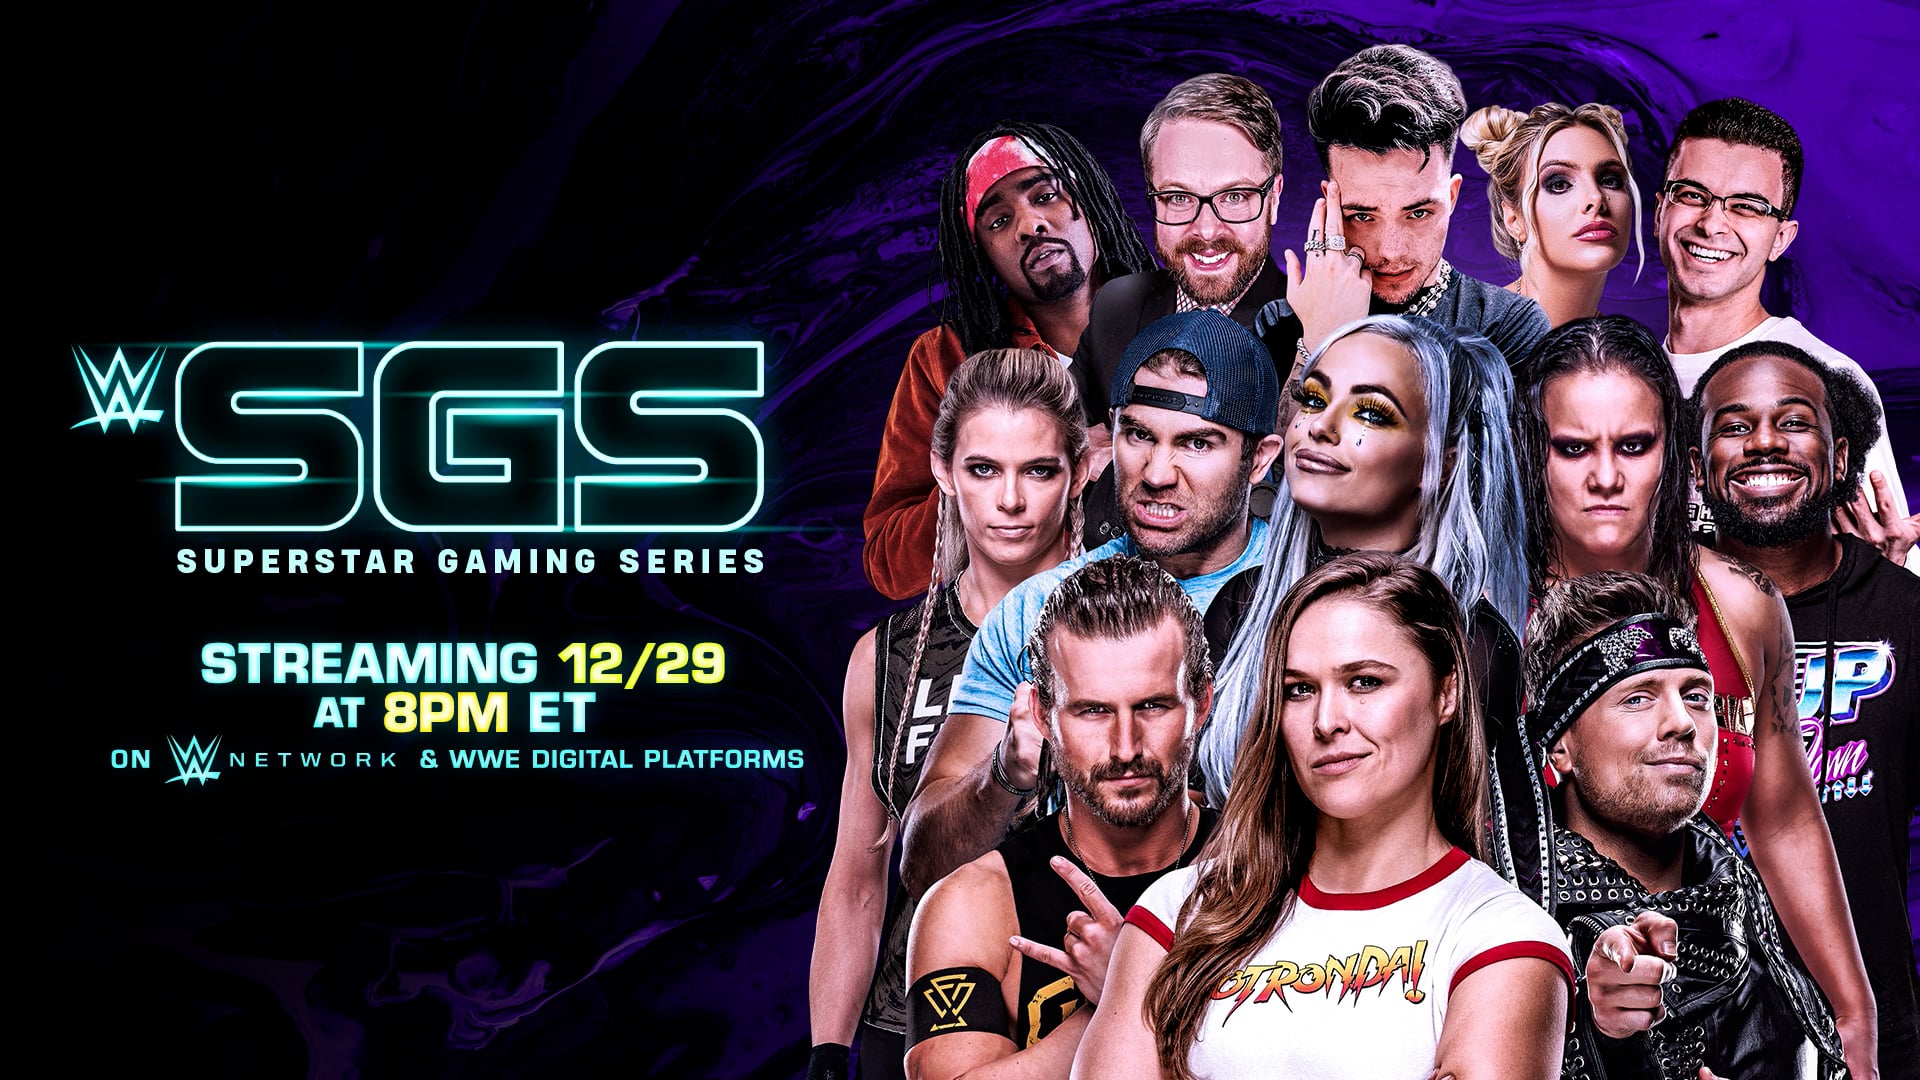 WWE Superstar Gaming title card featuring several wrestlers and social influencers